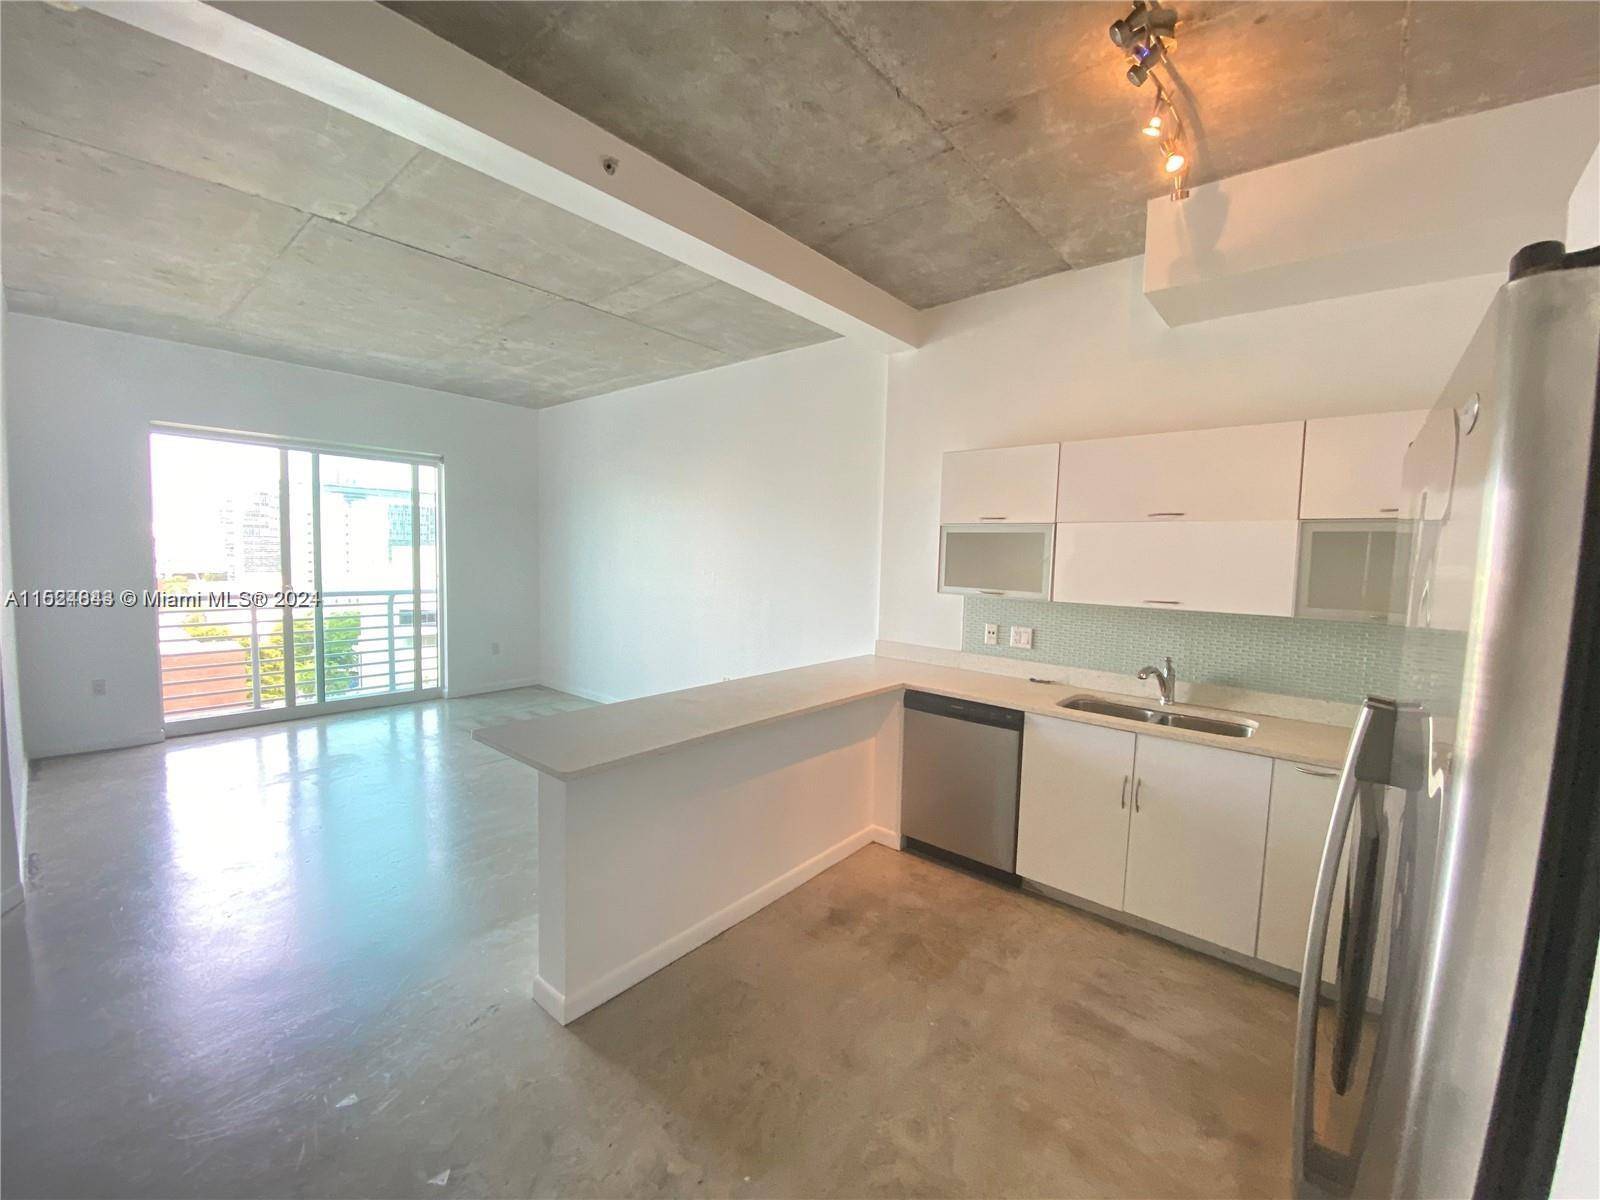 Unique 11th floor 1 bed with unobstructed skyline sunset views of Downtown.